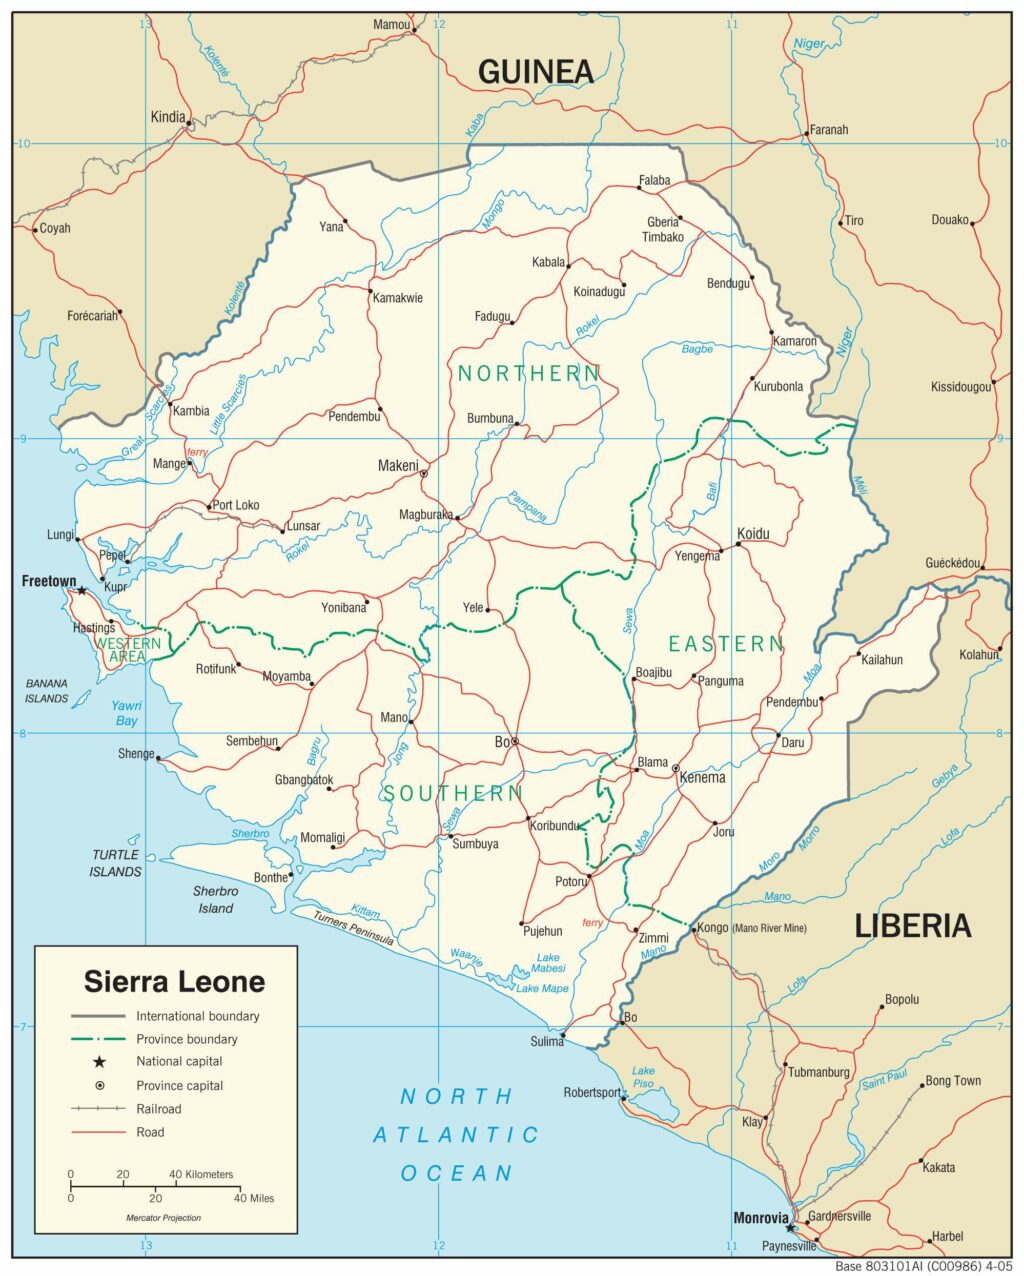 Sierra Leone physiography map.